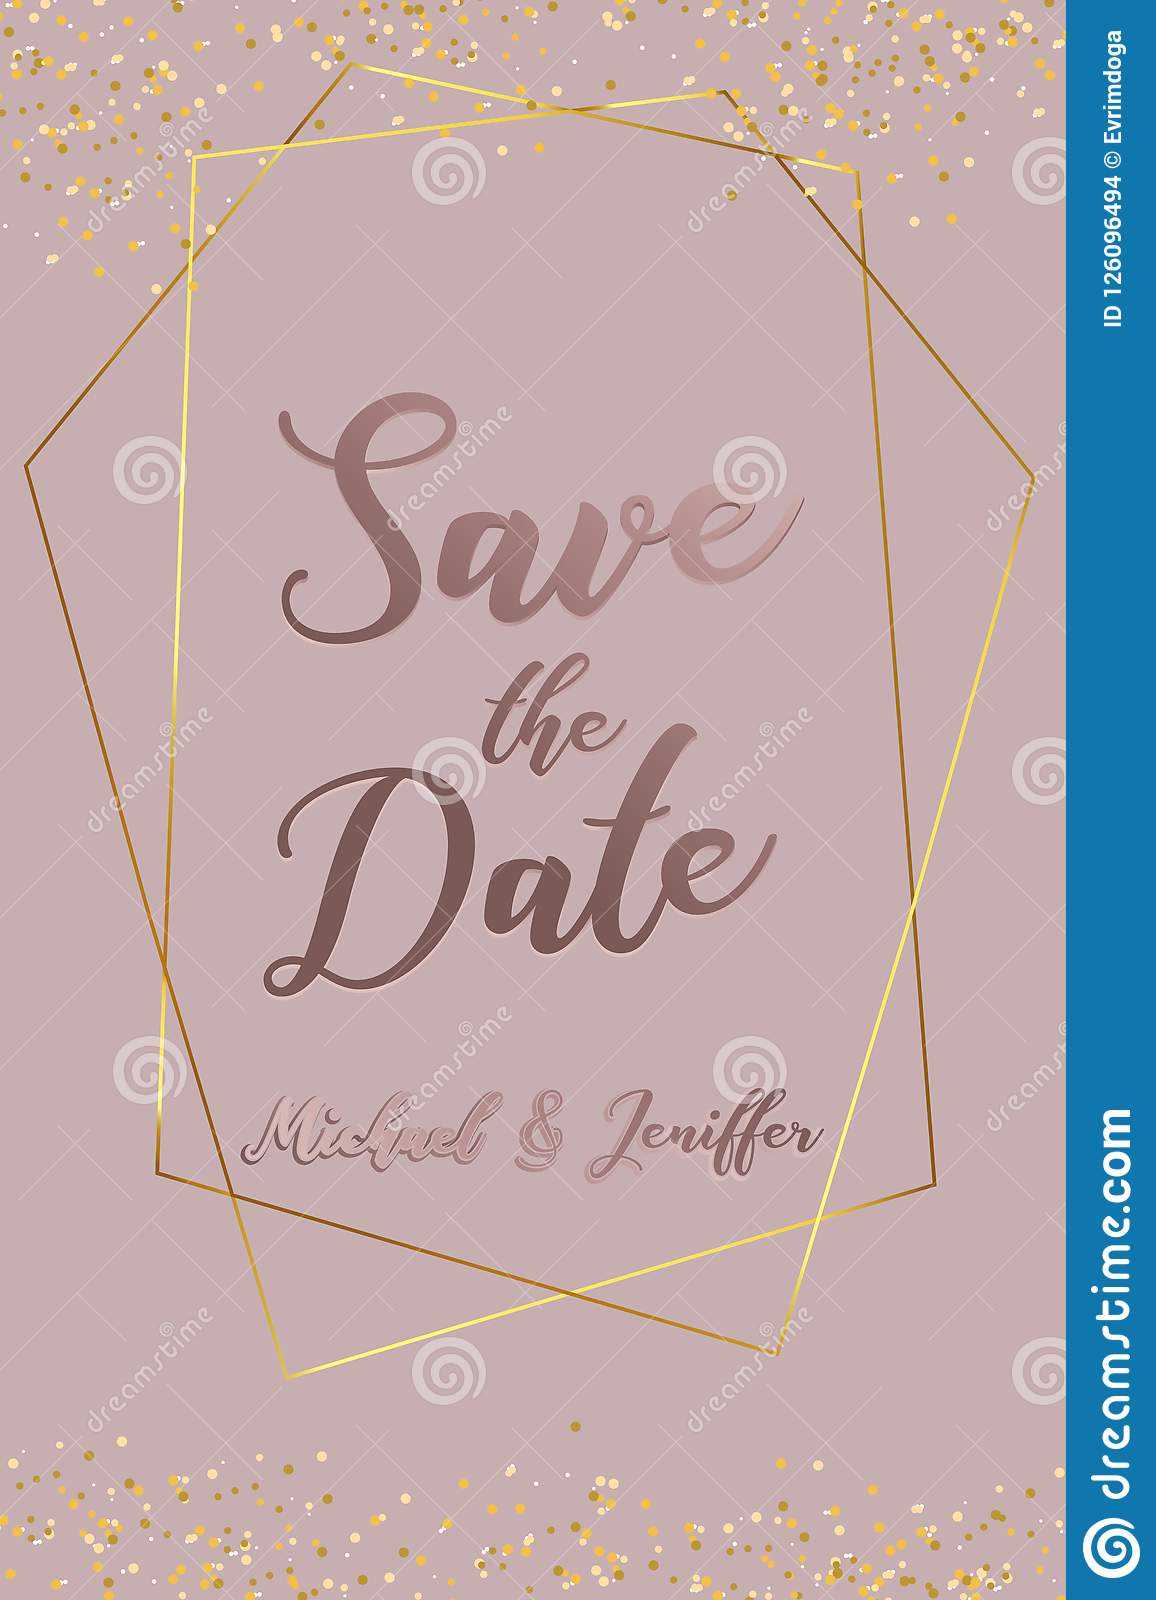 Wedding Invitation, Thank You Card, Save The Date Card In Thank You Card Template For Baby Shower